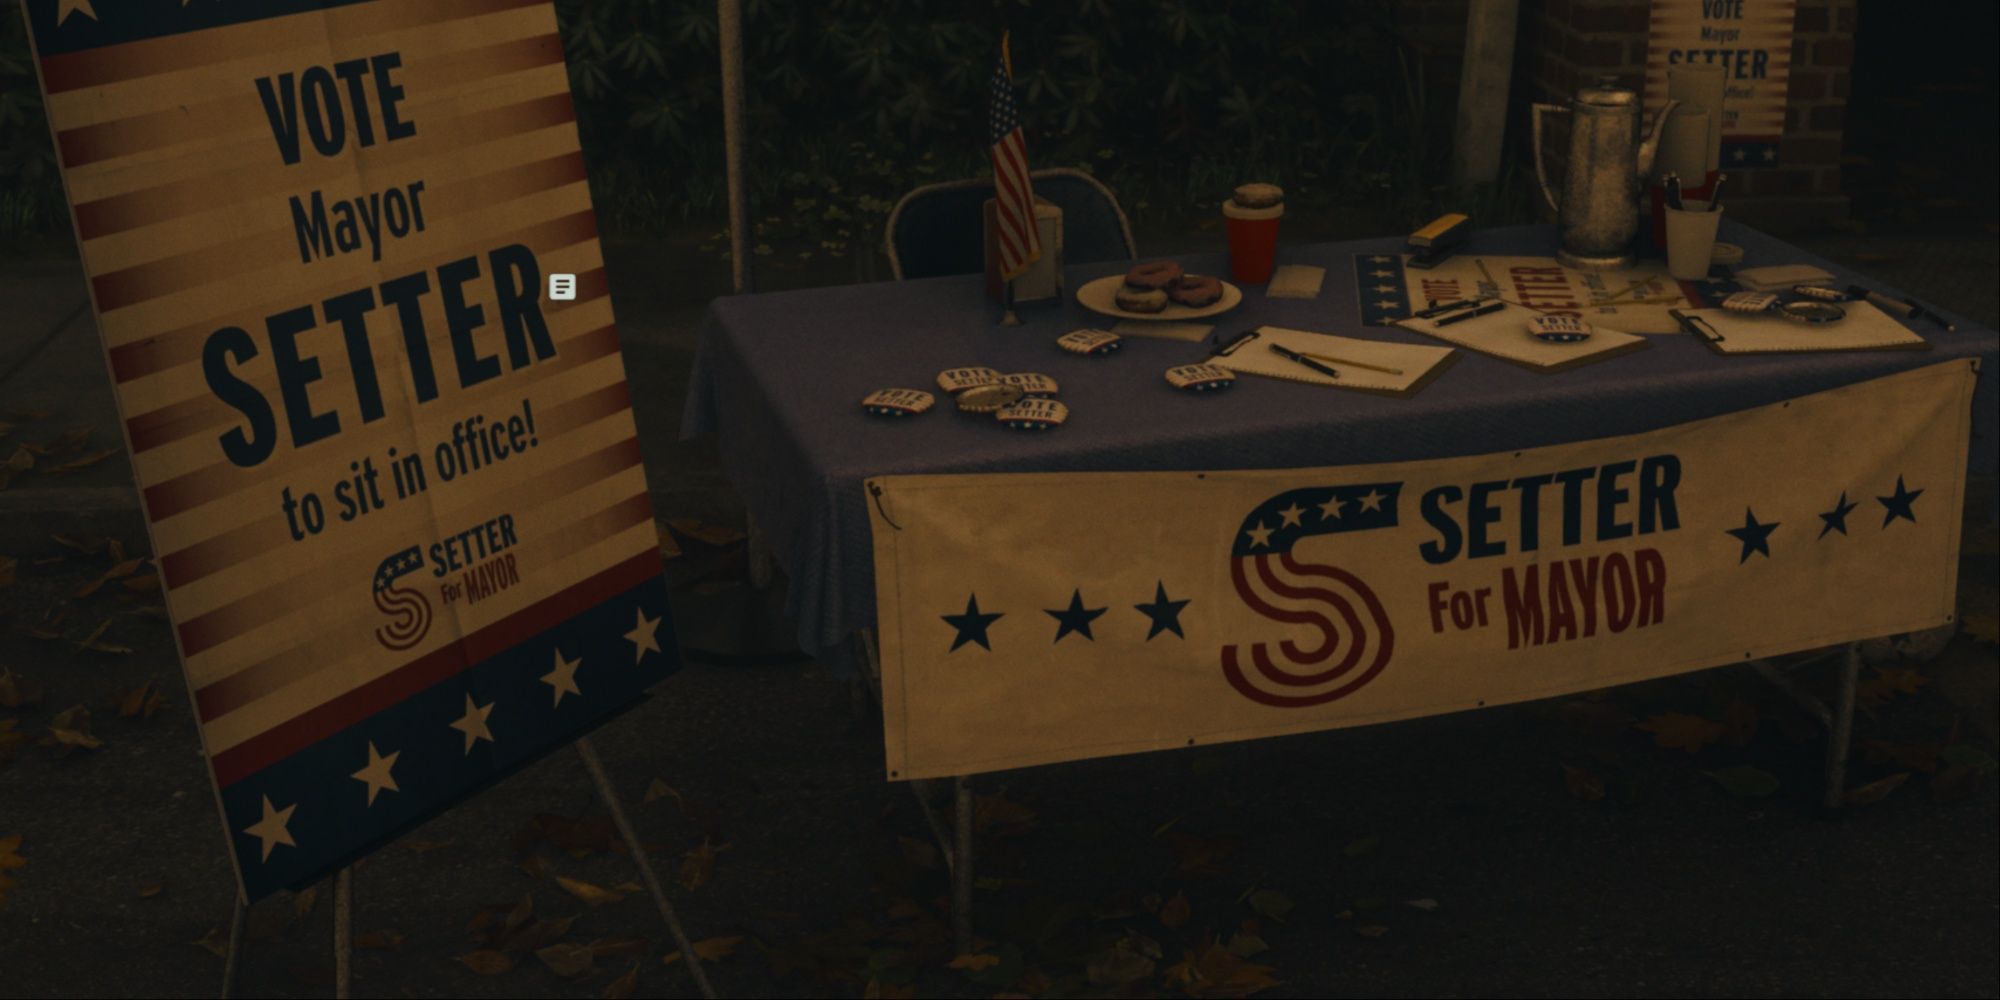 One of the campaign booth locations for mayoral candidate Setter, a poster saying 